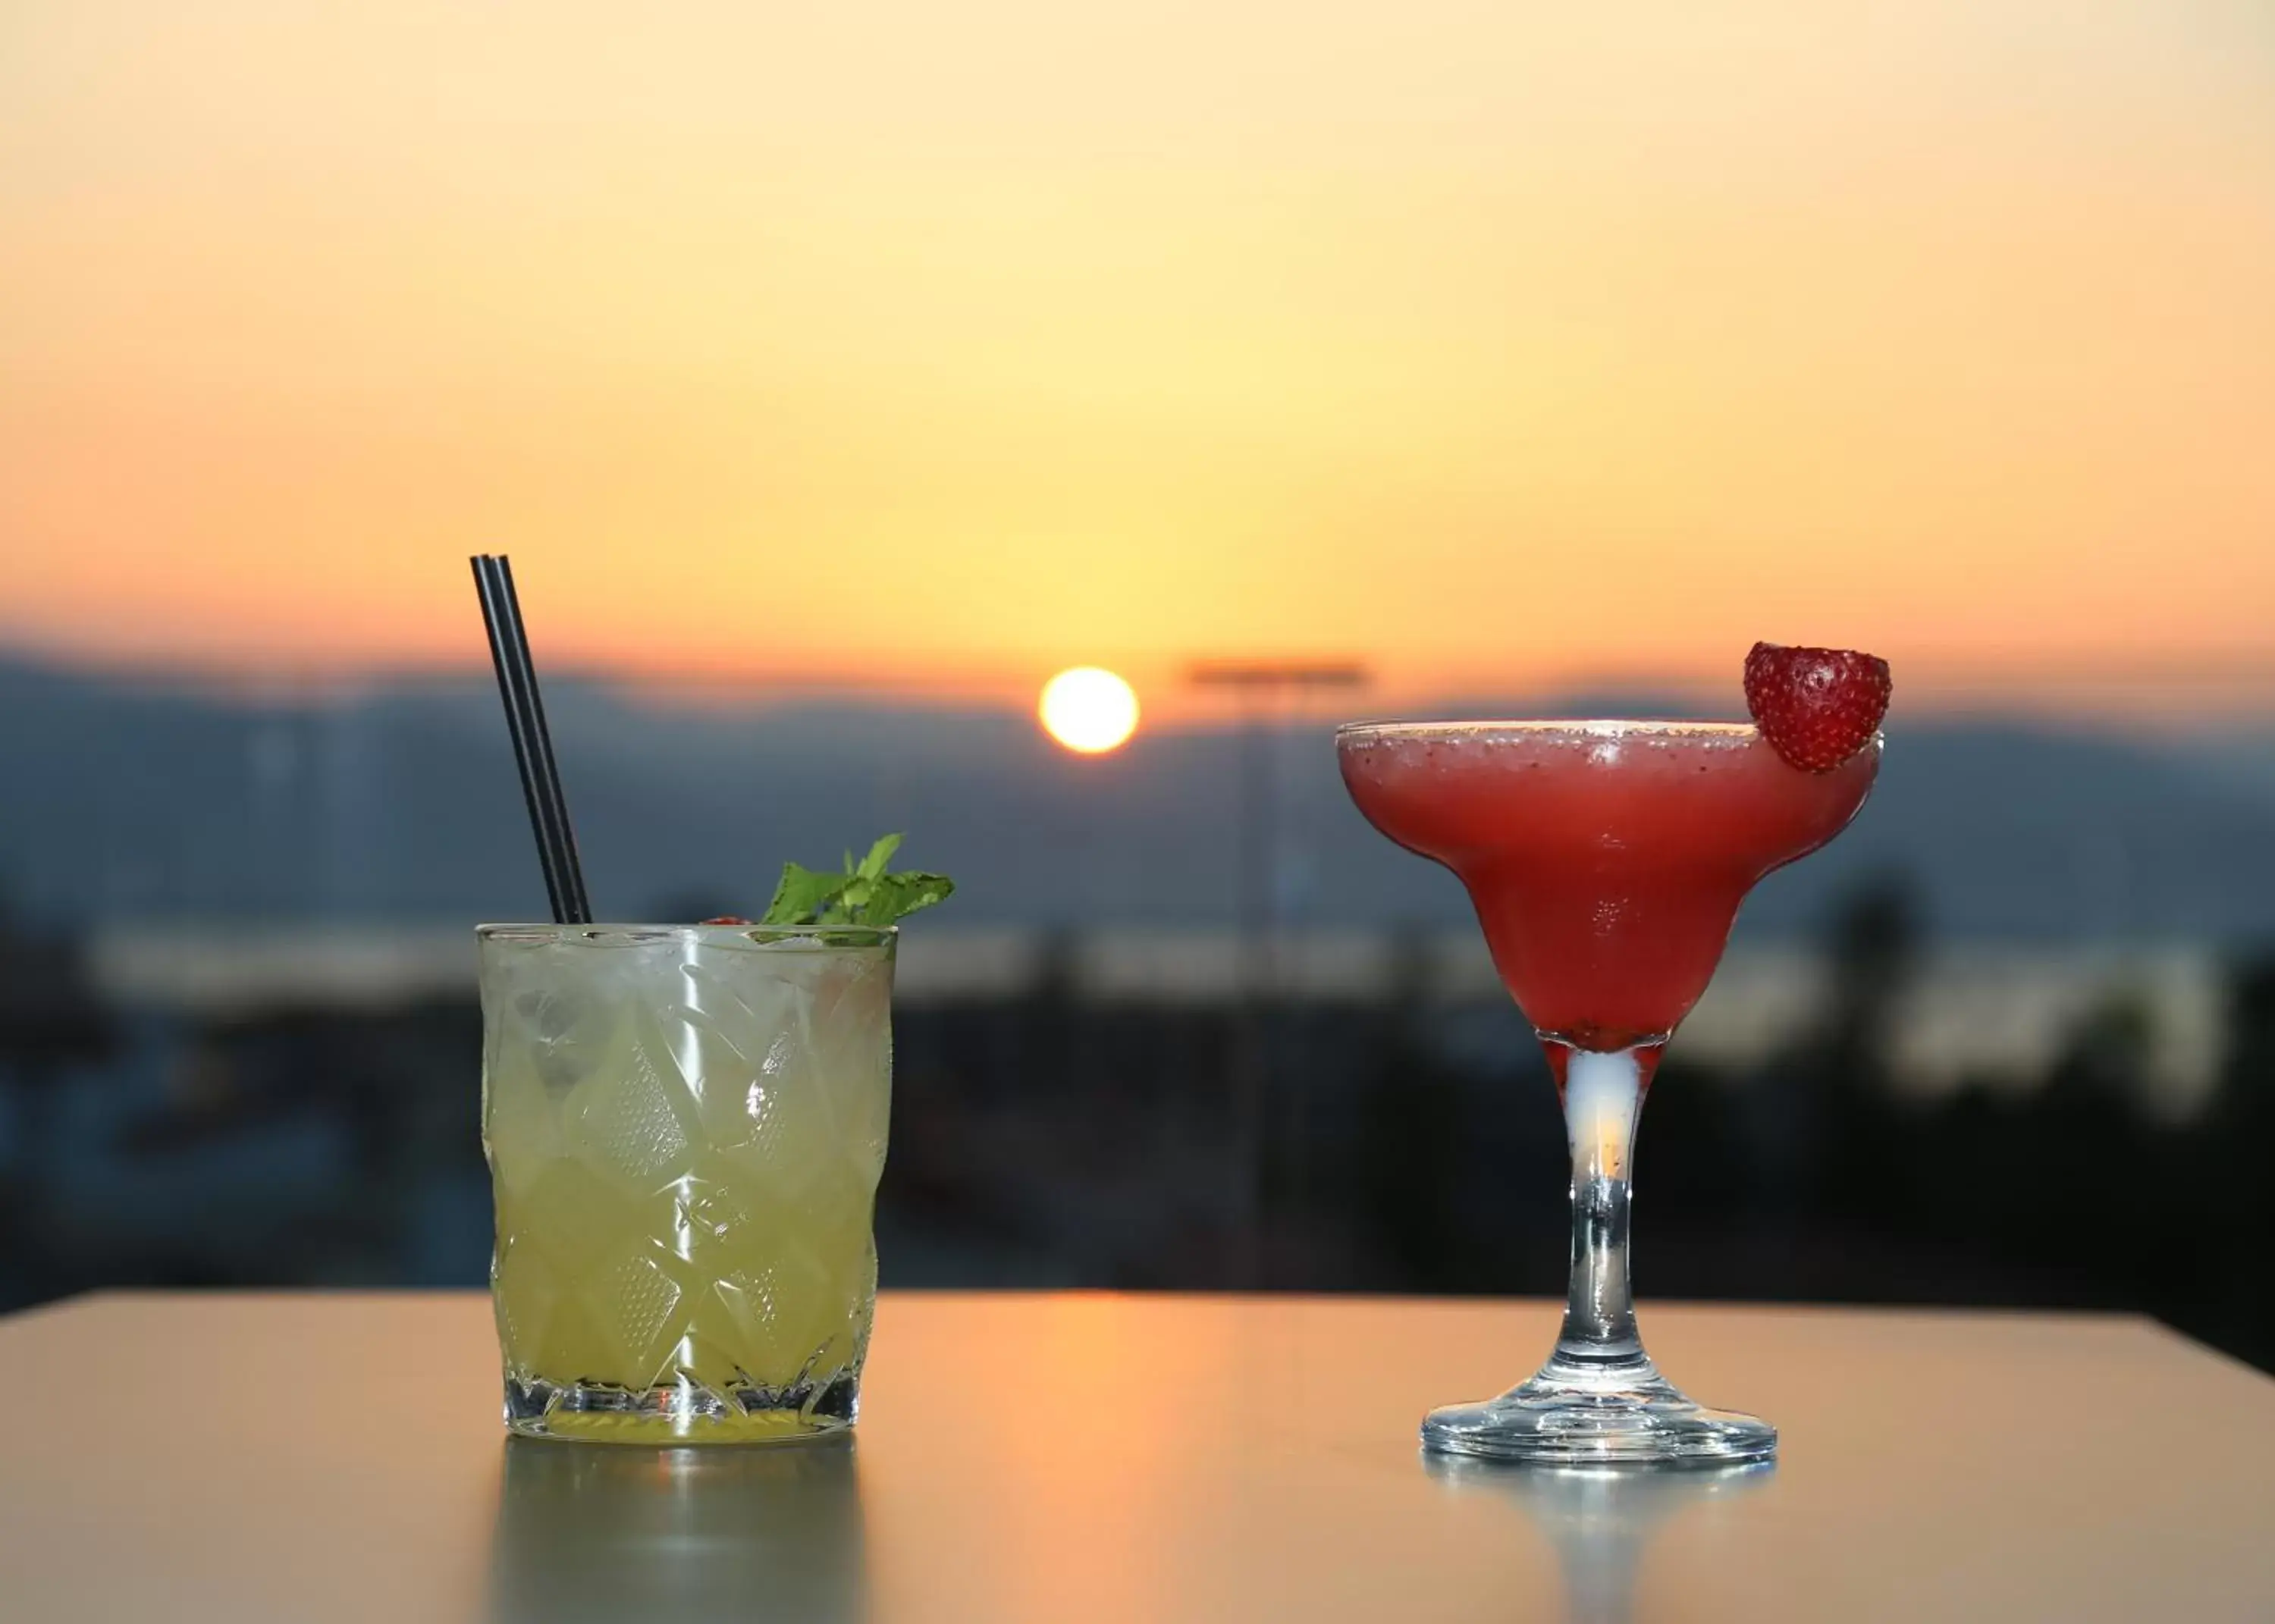 Food and drinks in Liberty of Nafplio